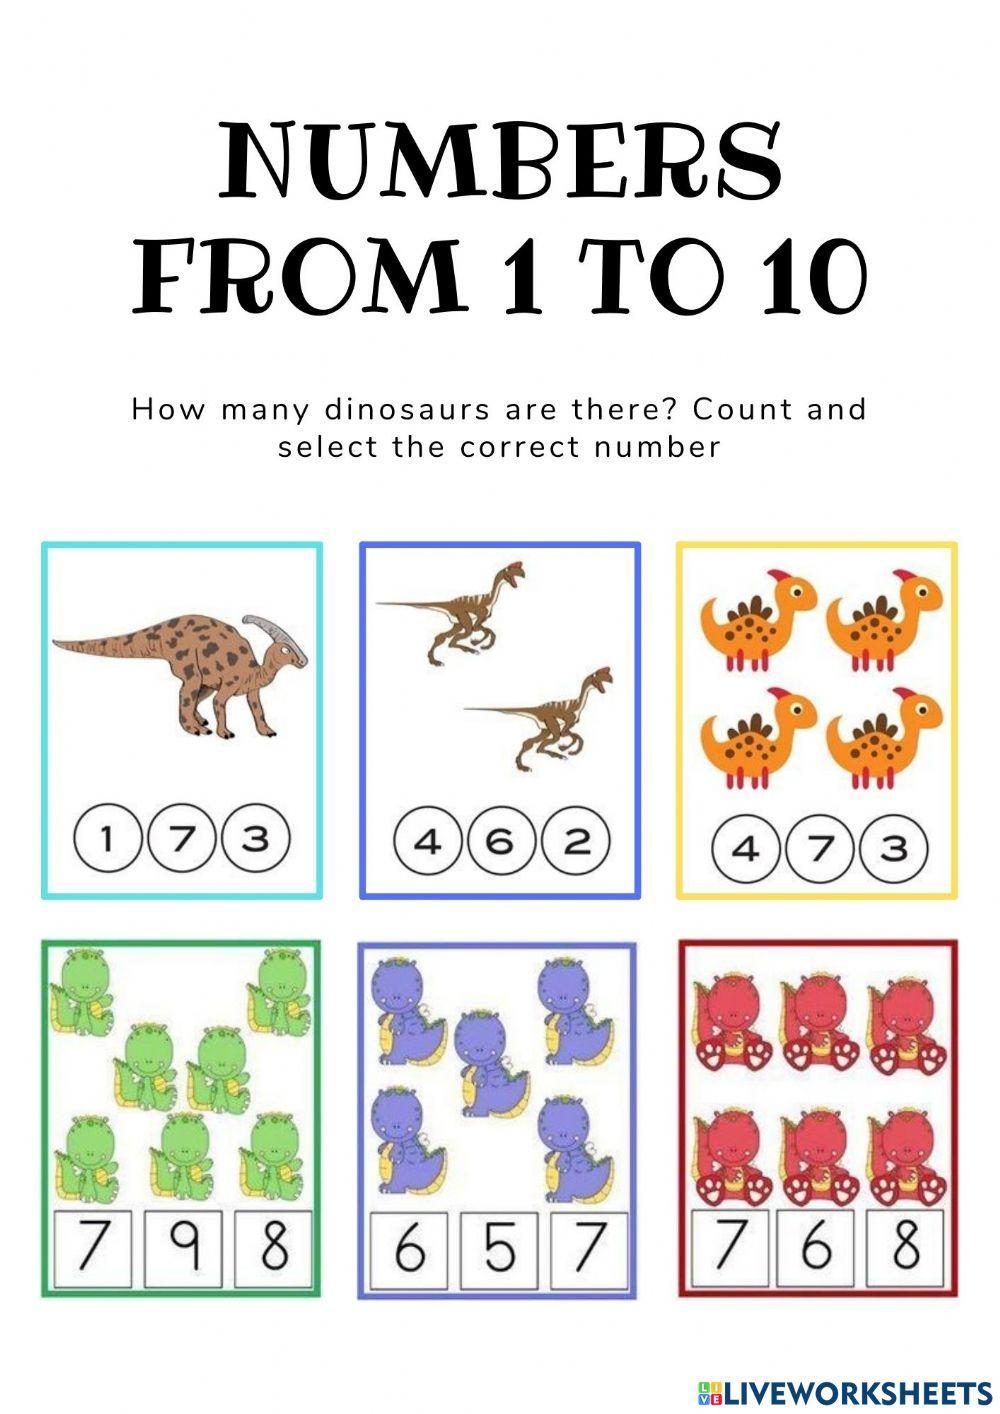 NUMBERS FROM 1 to 10